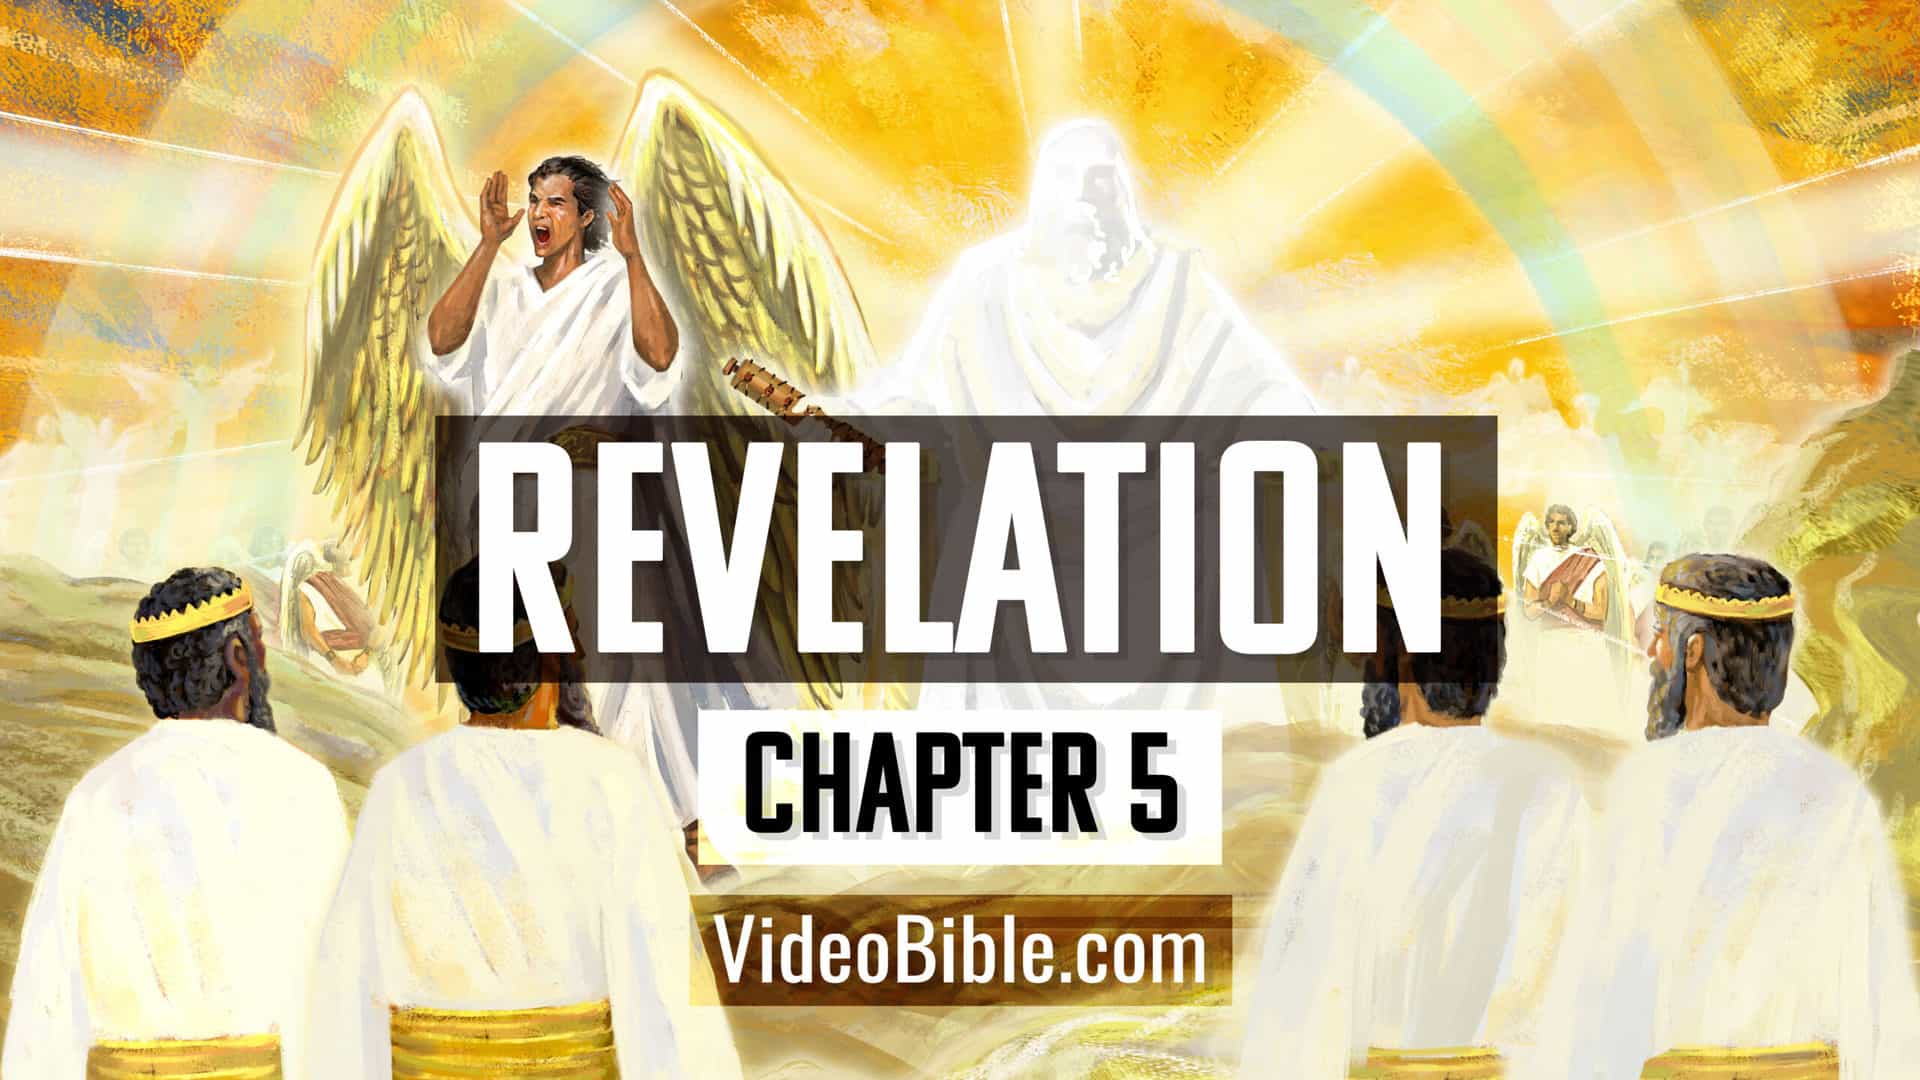 Cover image for book of Revelation Chapter 5